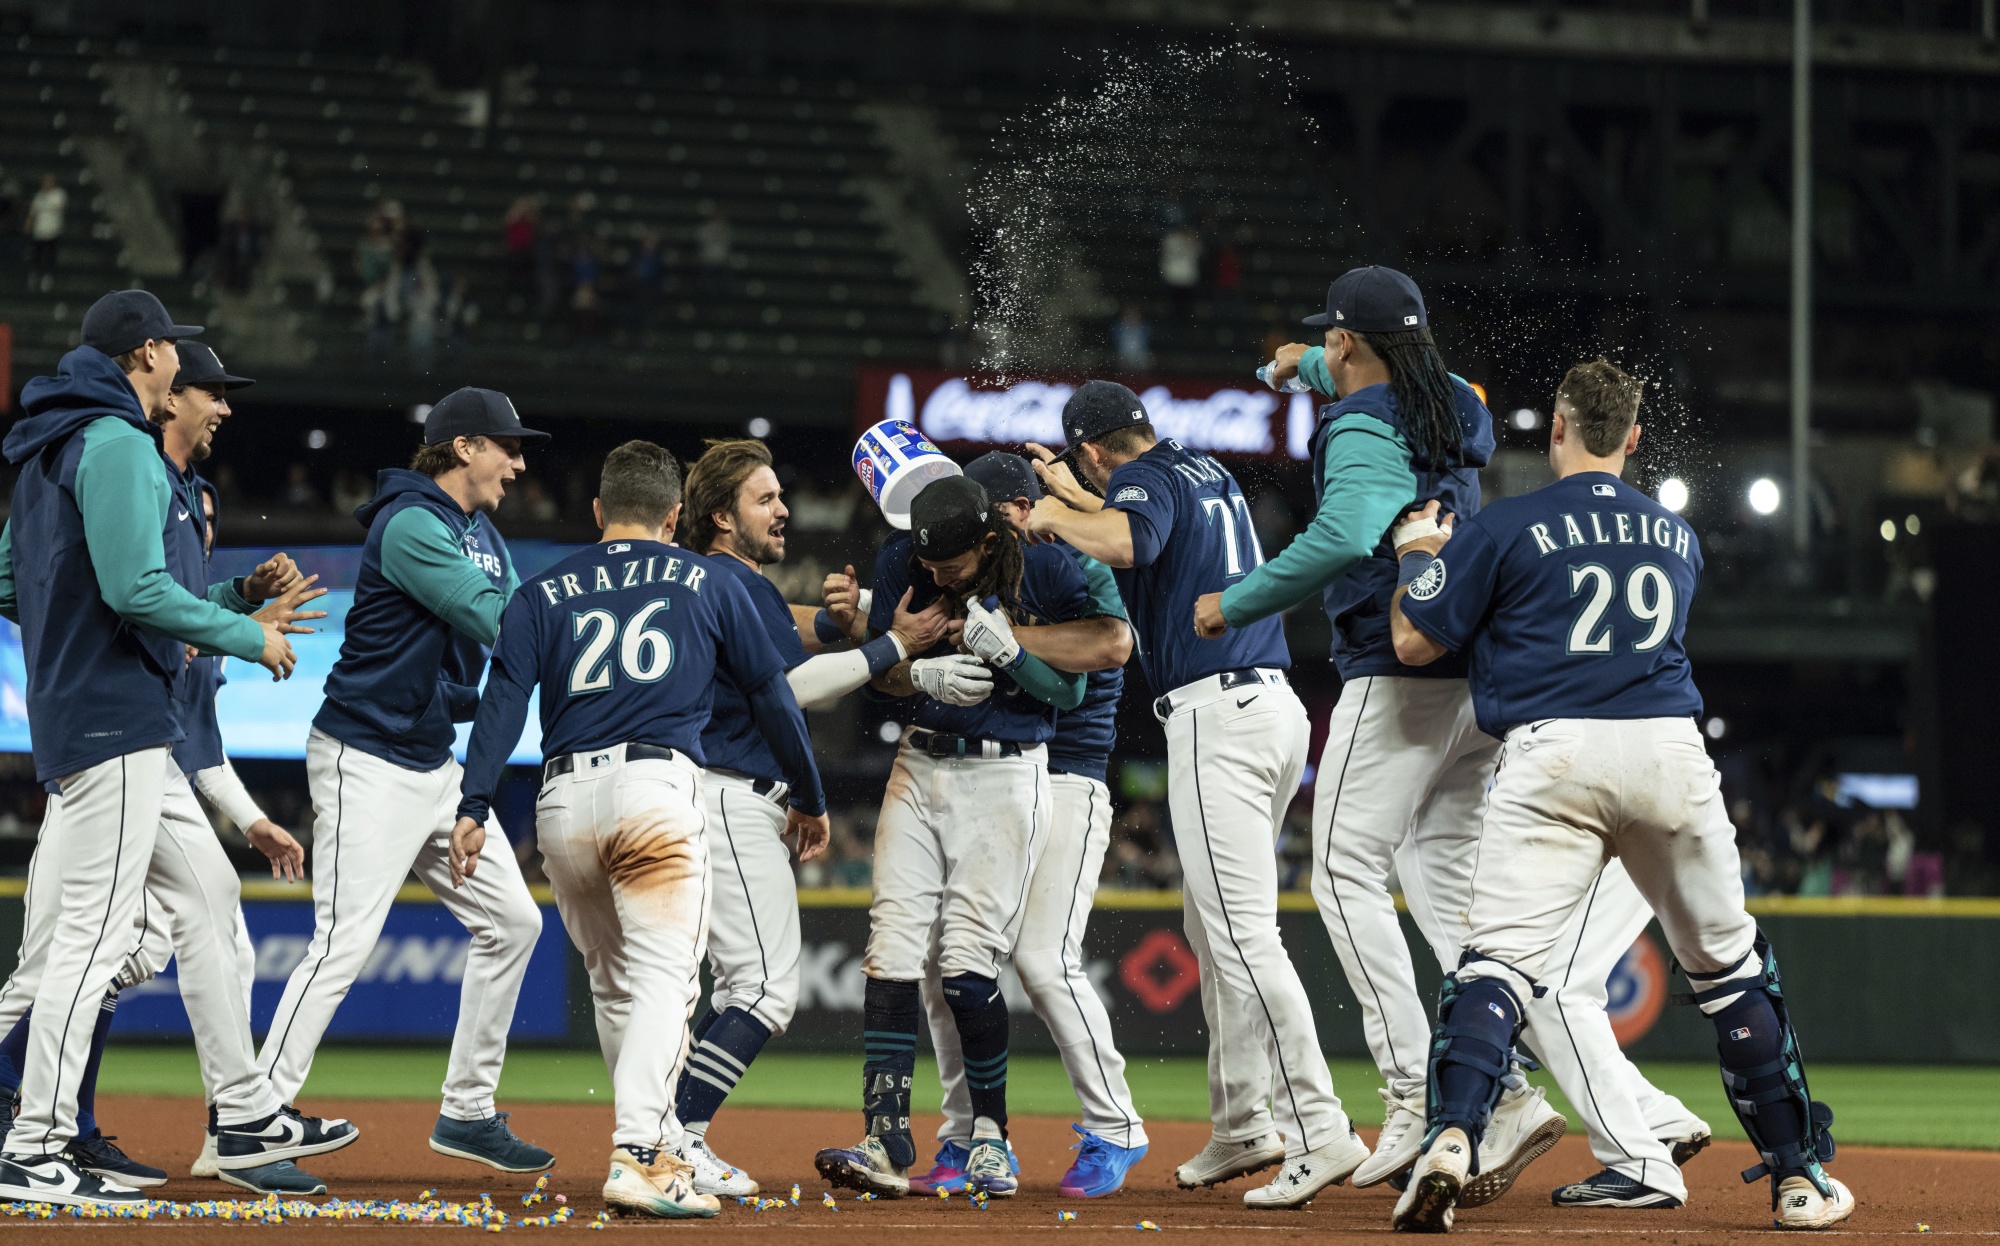 Clutch hits elude Mariners in loss to Rangers